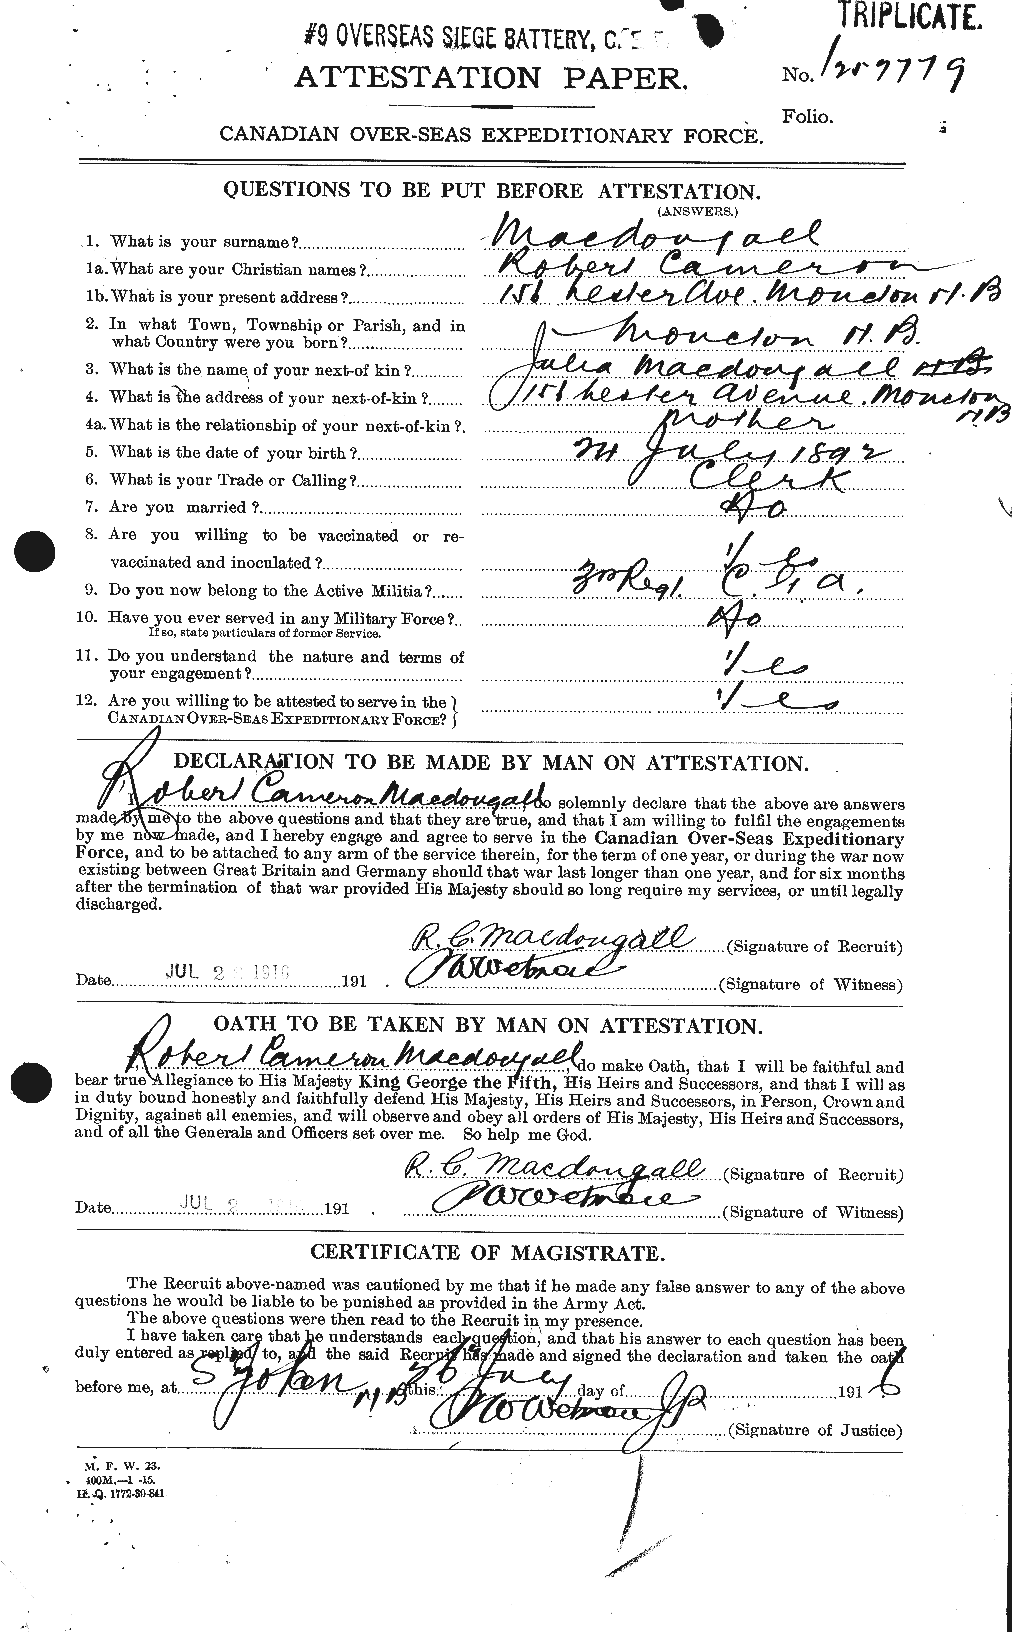 Personnel Records of the First World War - CEF 518374a